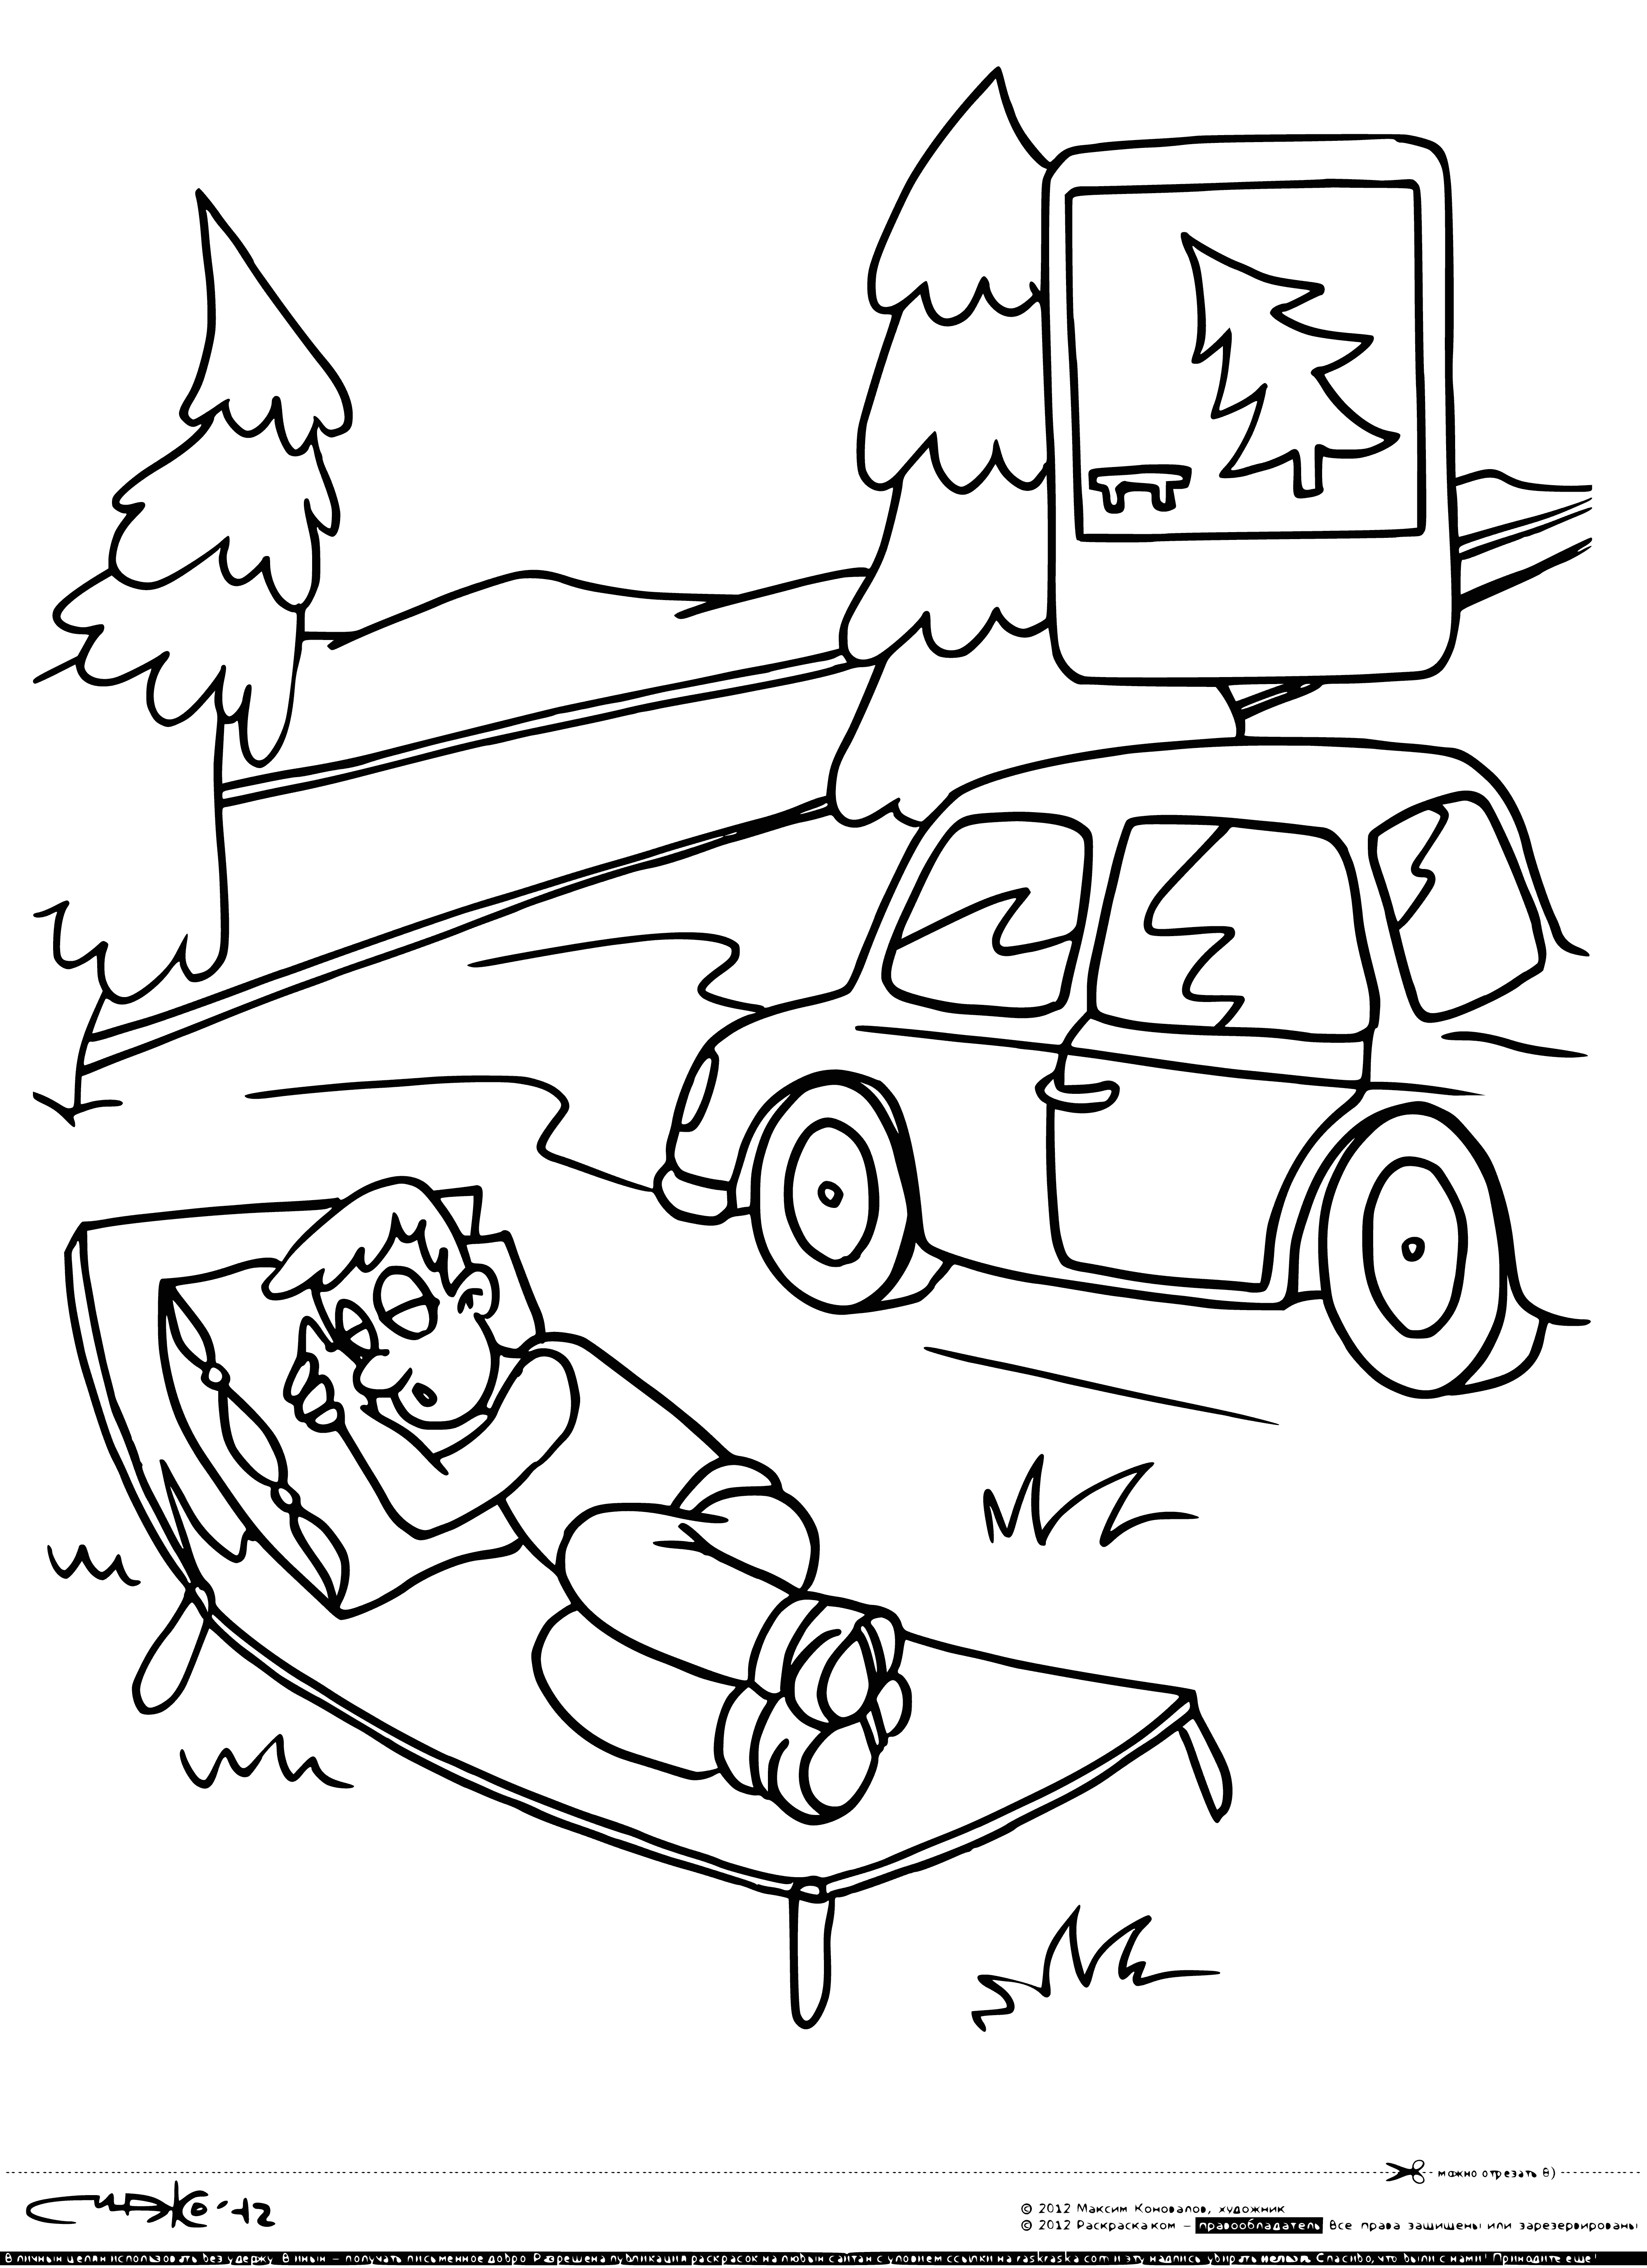 Resting-place coloring page